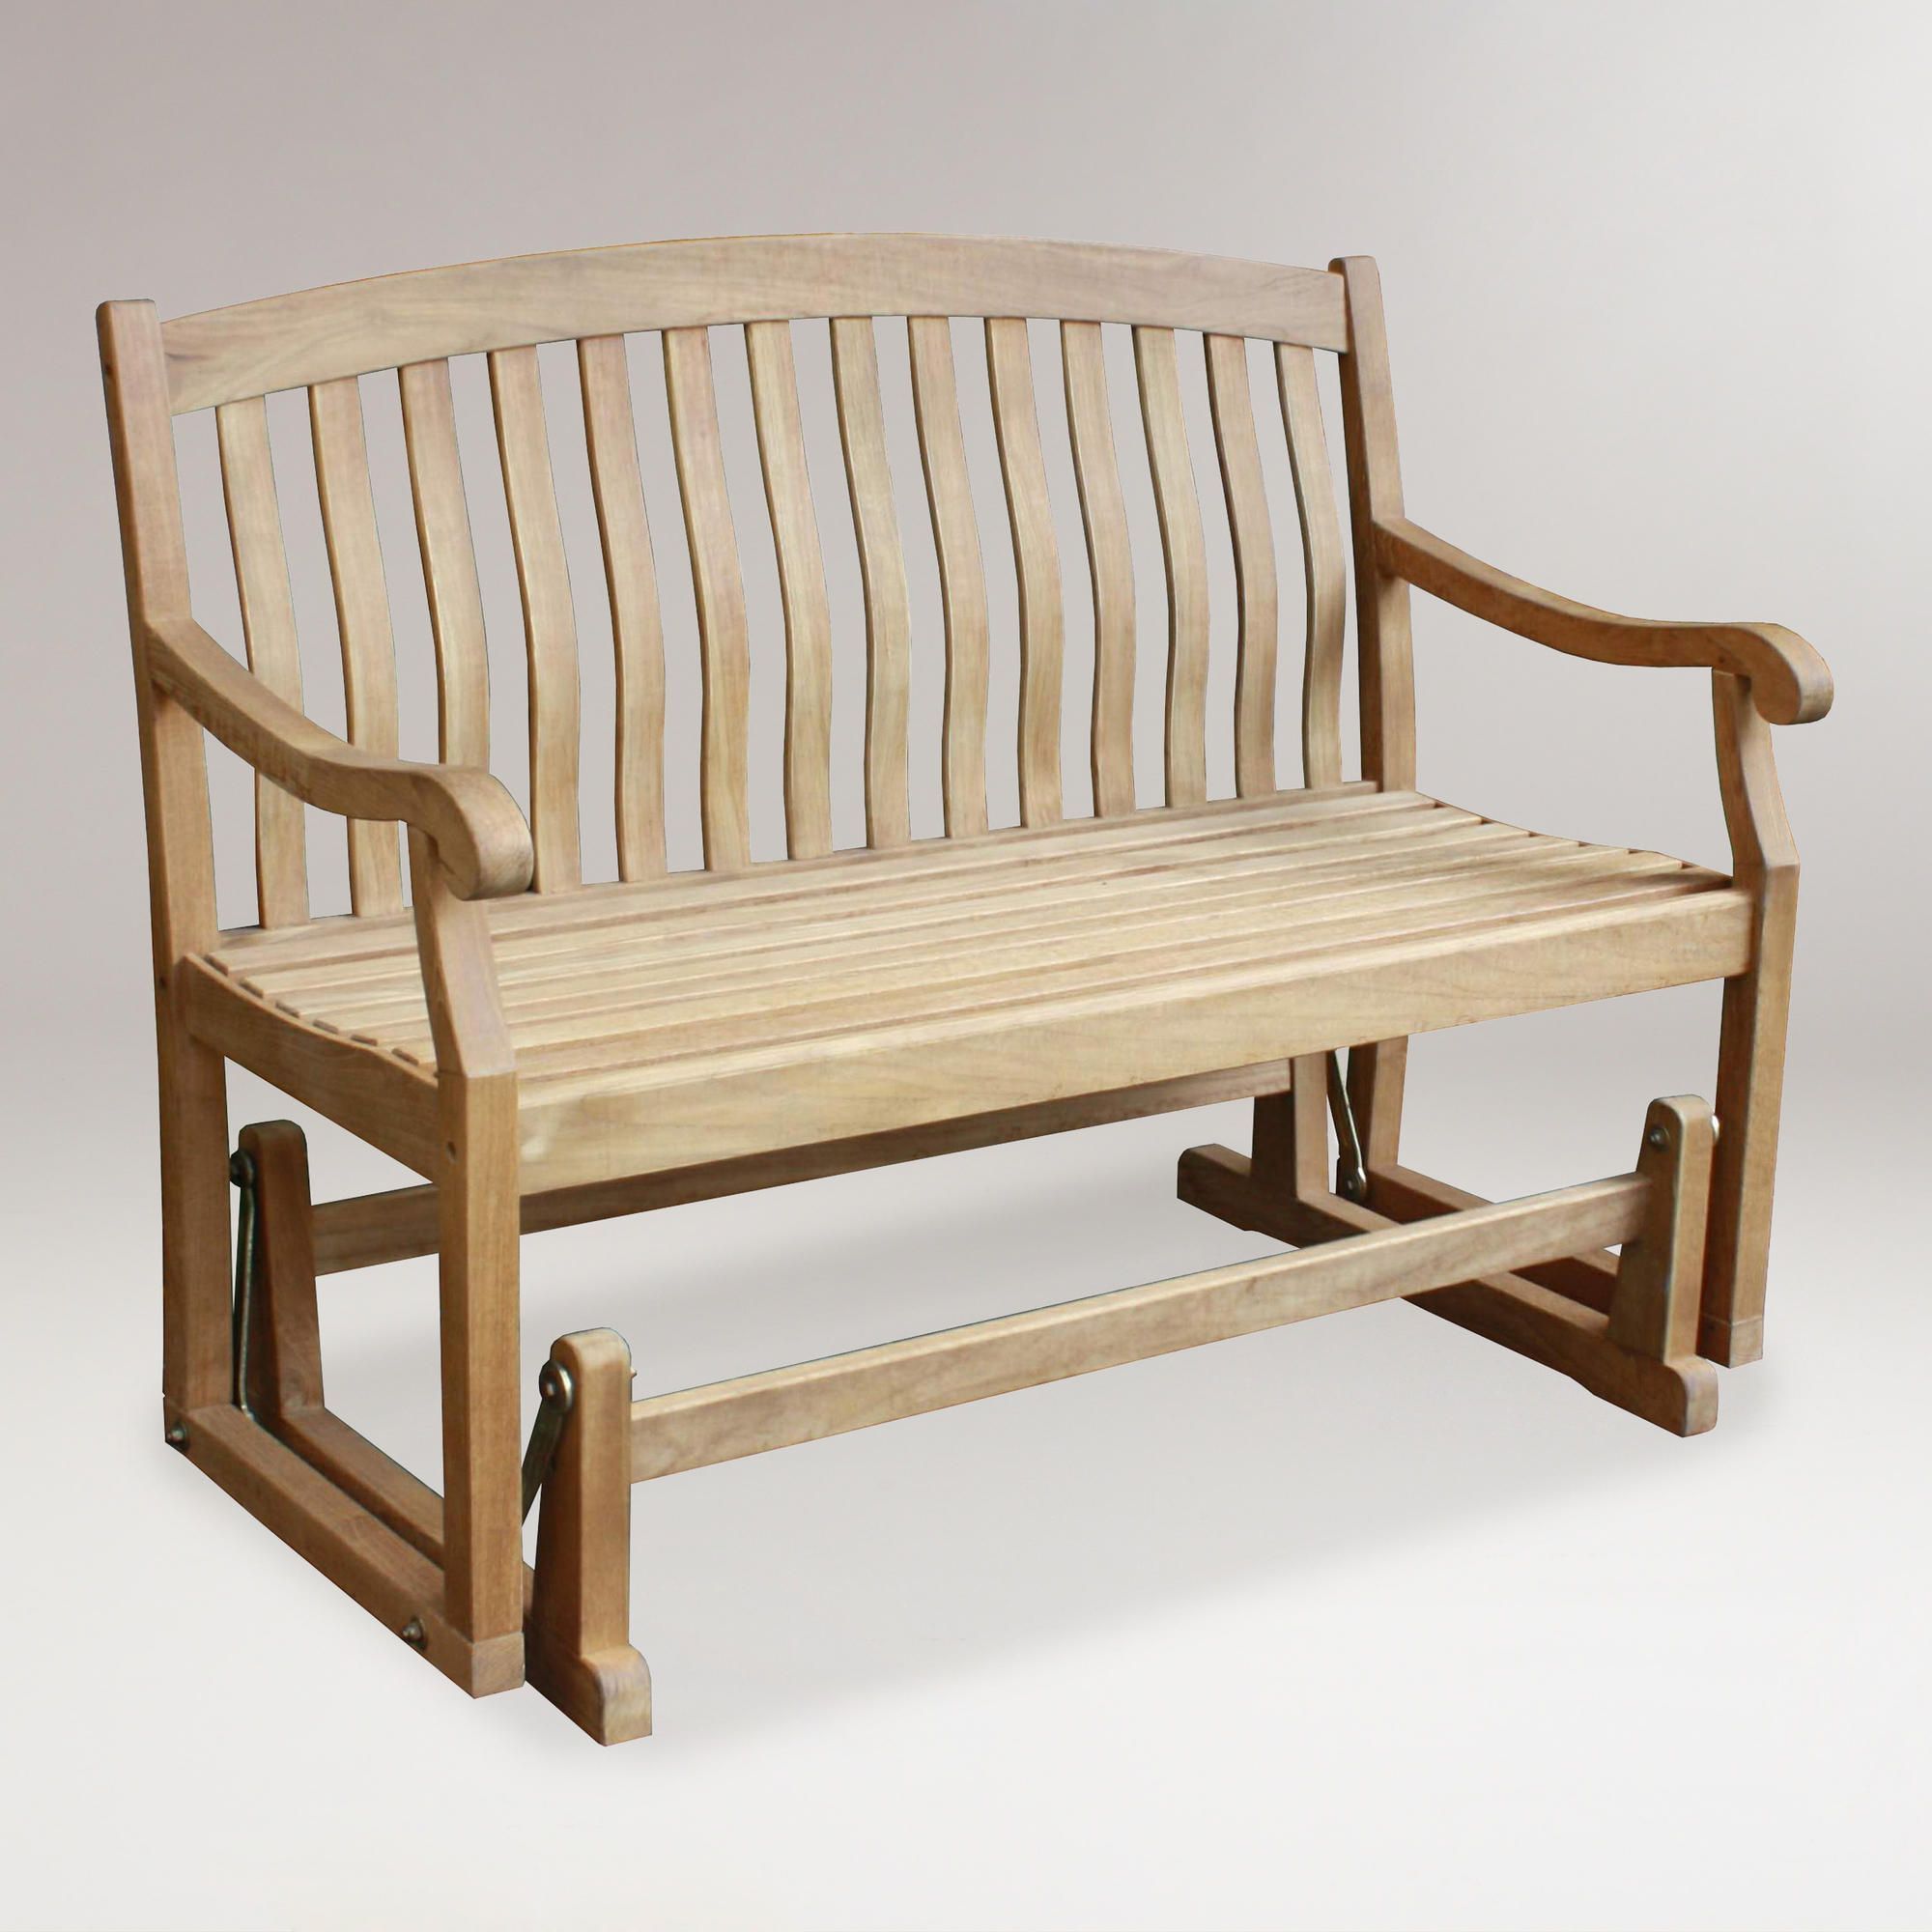 Need To Spruce Up Your Space For Fall? Check Out Cost Plus Throughout Teak Glider Benches (View 24 of 25)